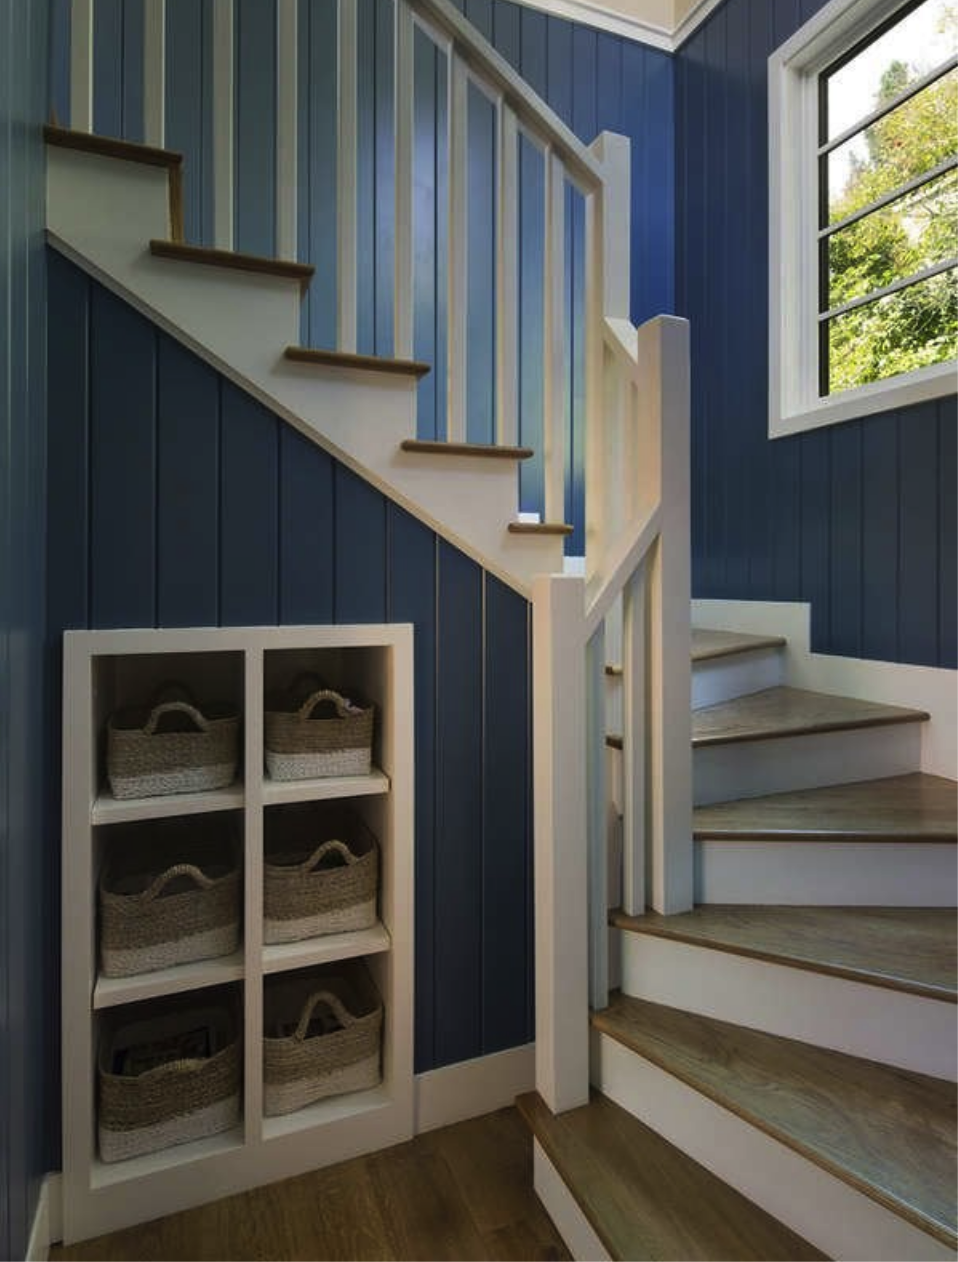 winding staircase with blue walls and small cubby holes in wall with baskets for storage